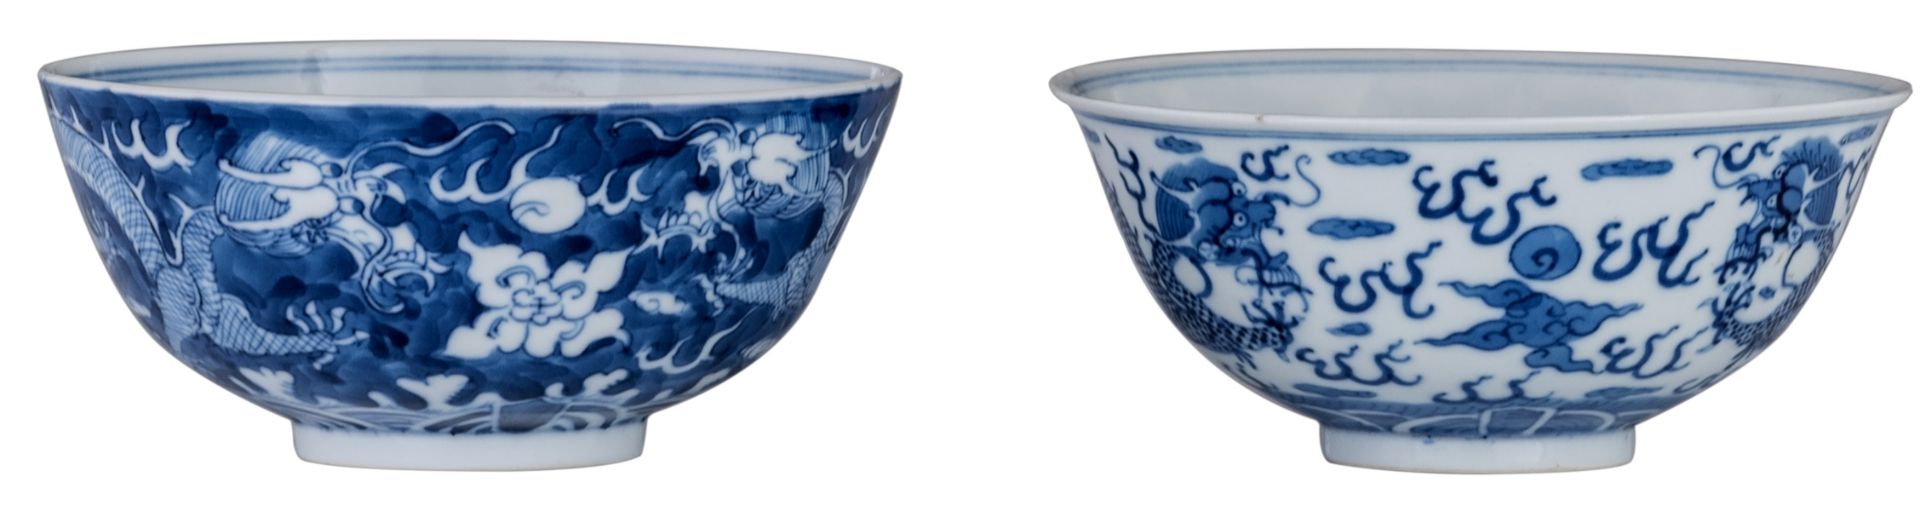 Two Chinese blue and white dragon decorated bowls, with a Kangxi mark, H 5,5 - 6 - ø 12,5 - 13 cm